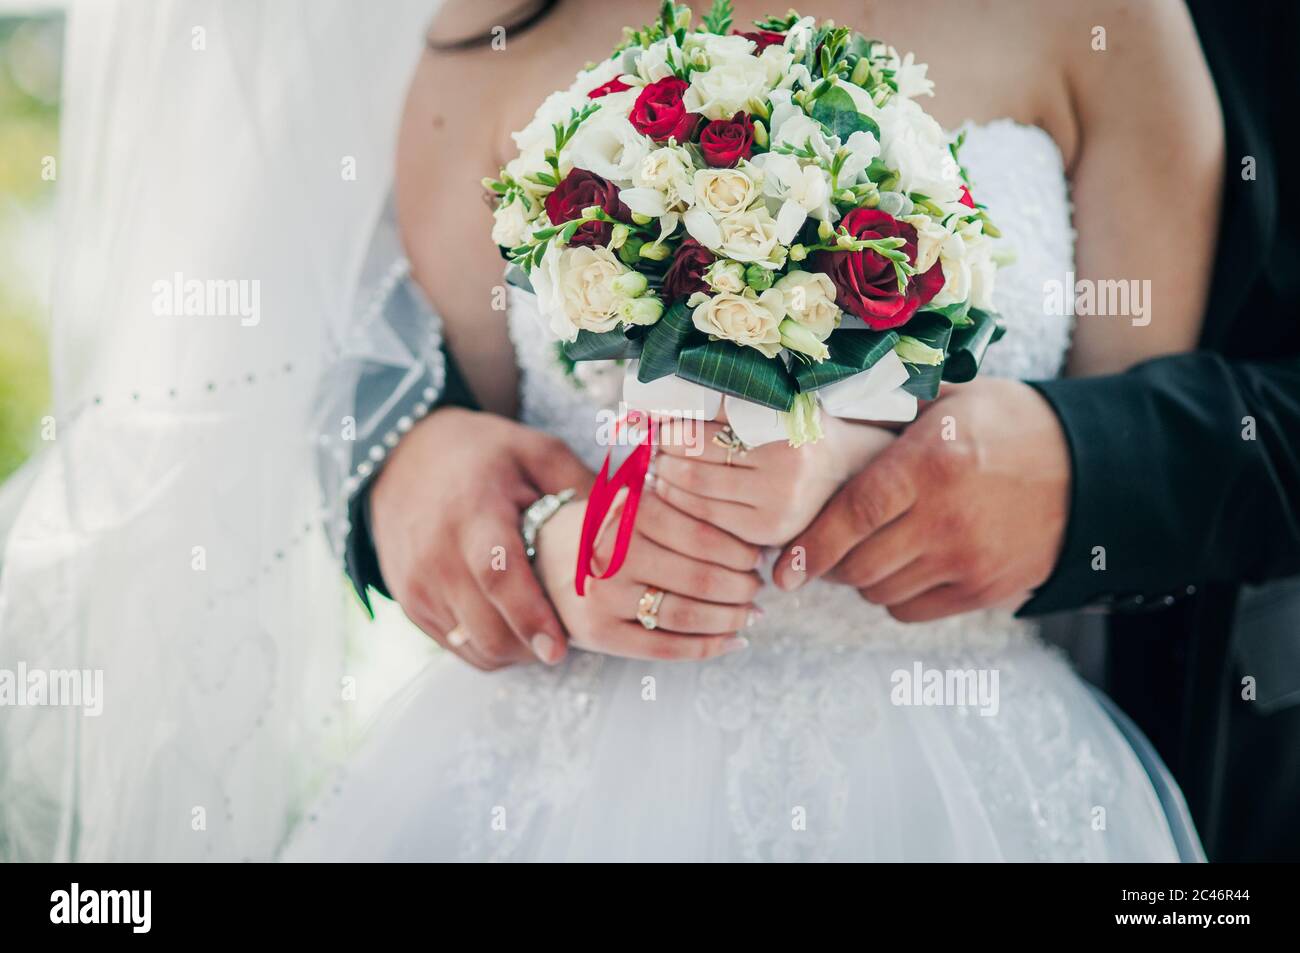 Colorfull wedding bouquet in the hands of bride Stock Photo